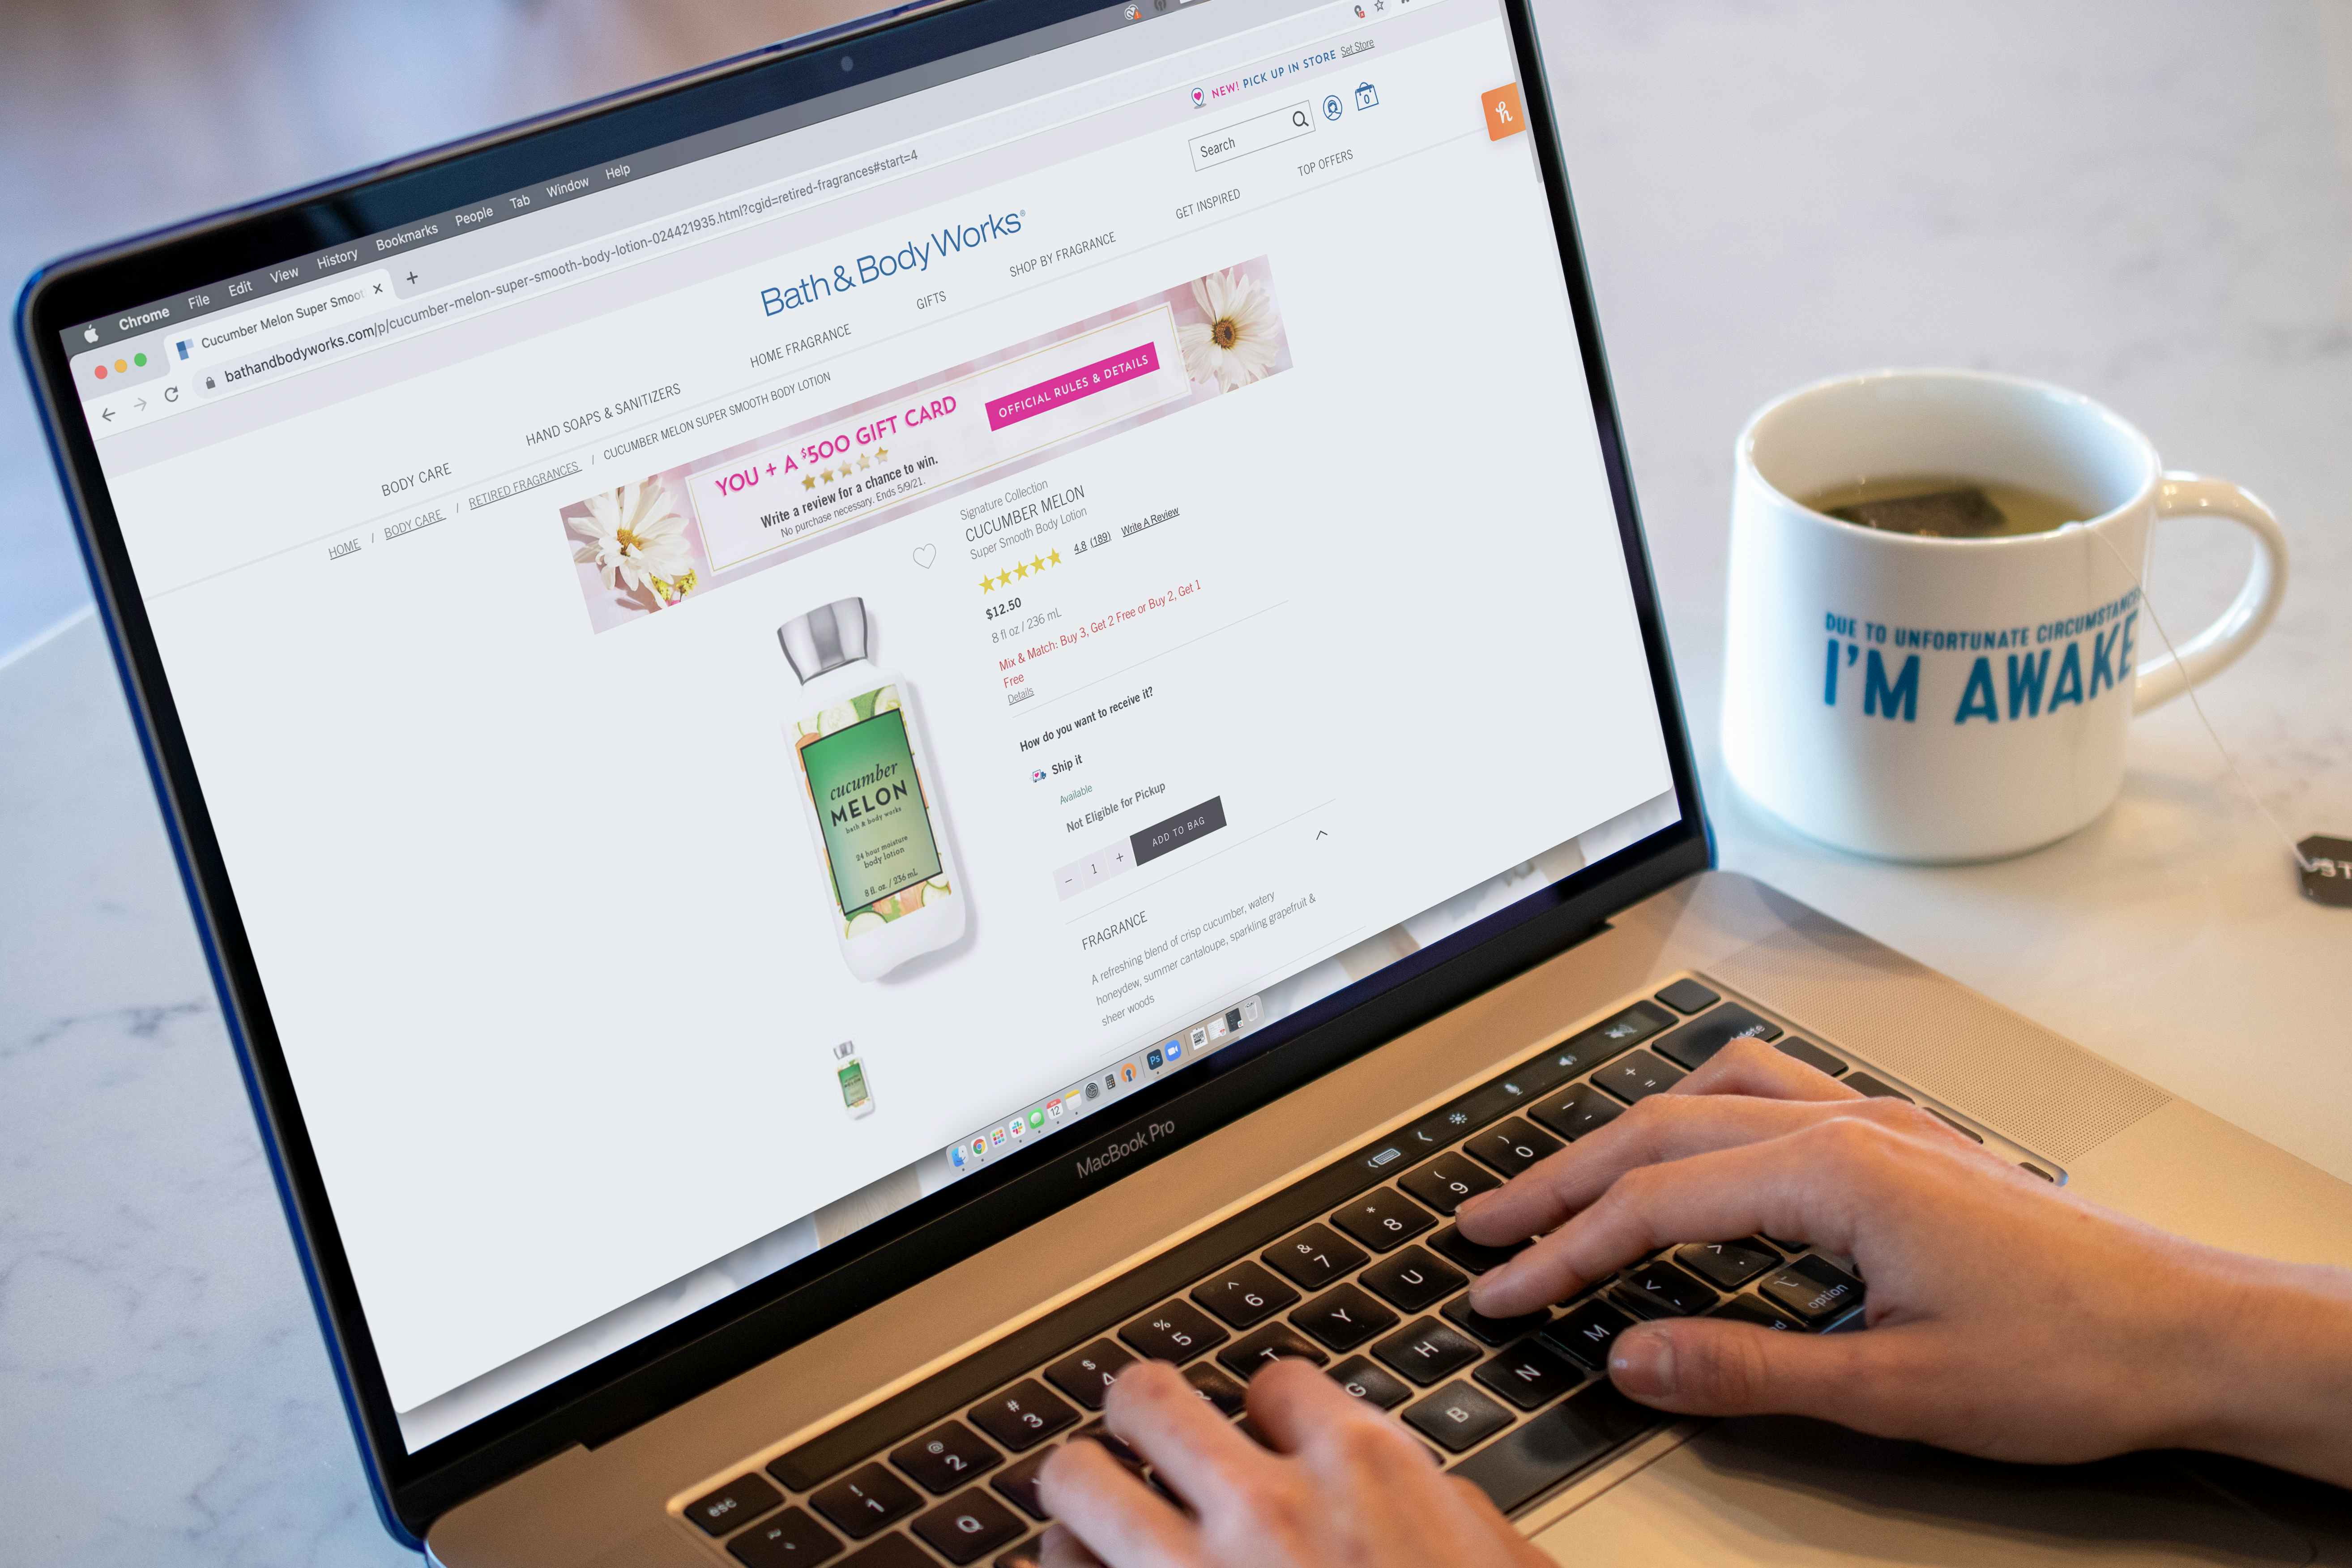 A person using a computer with Bathandbodyworks.com on the screen.